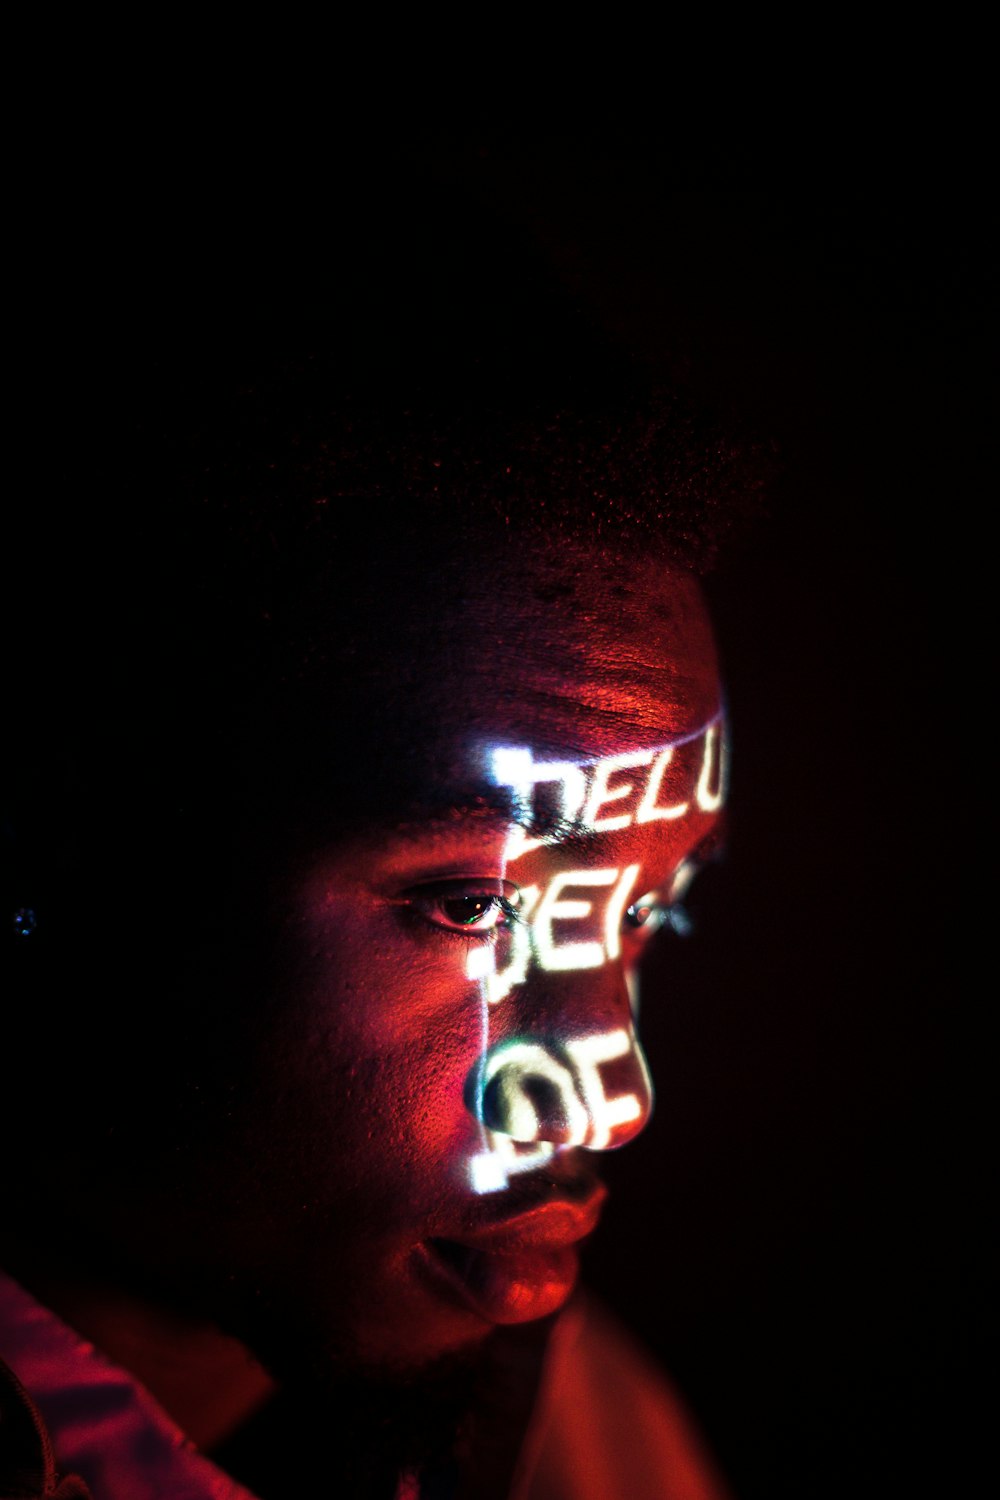 man with red and white light on face